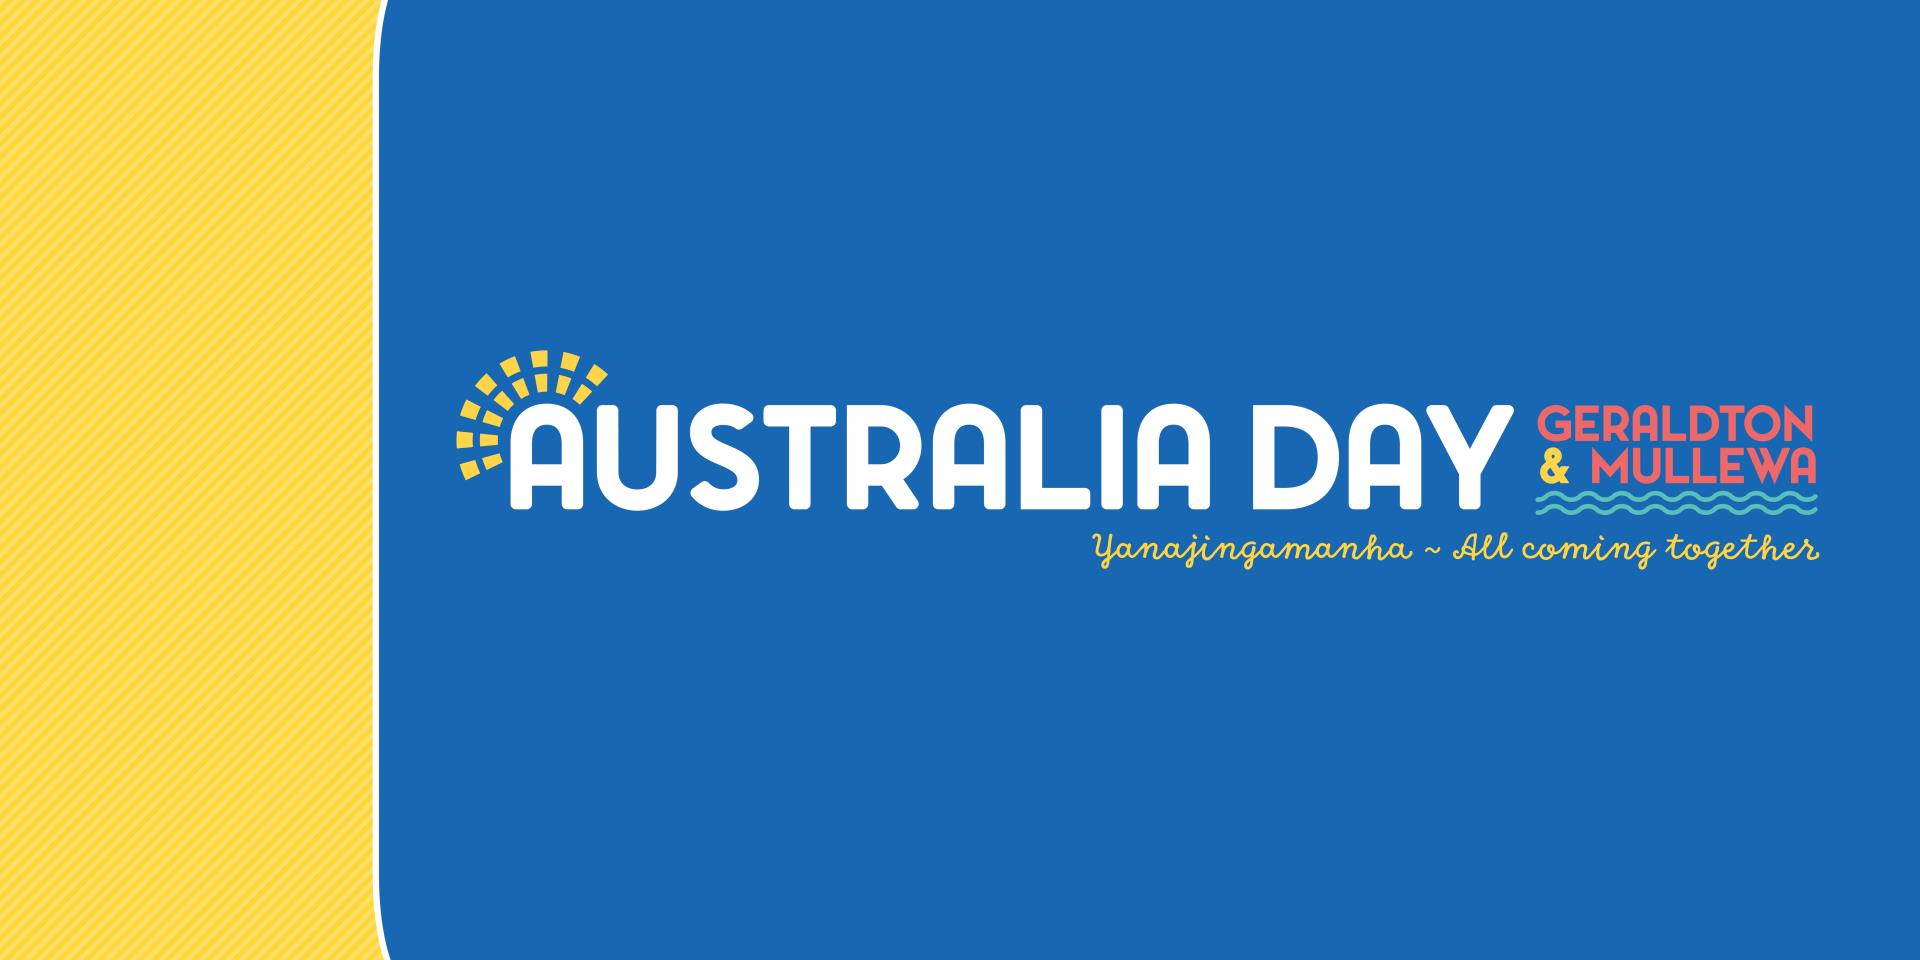 Australia Day in Geraldton and Mullewa